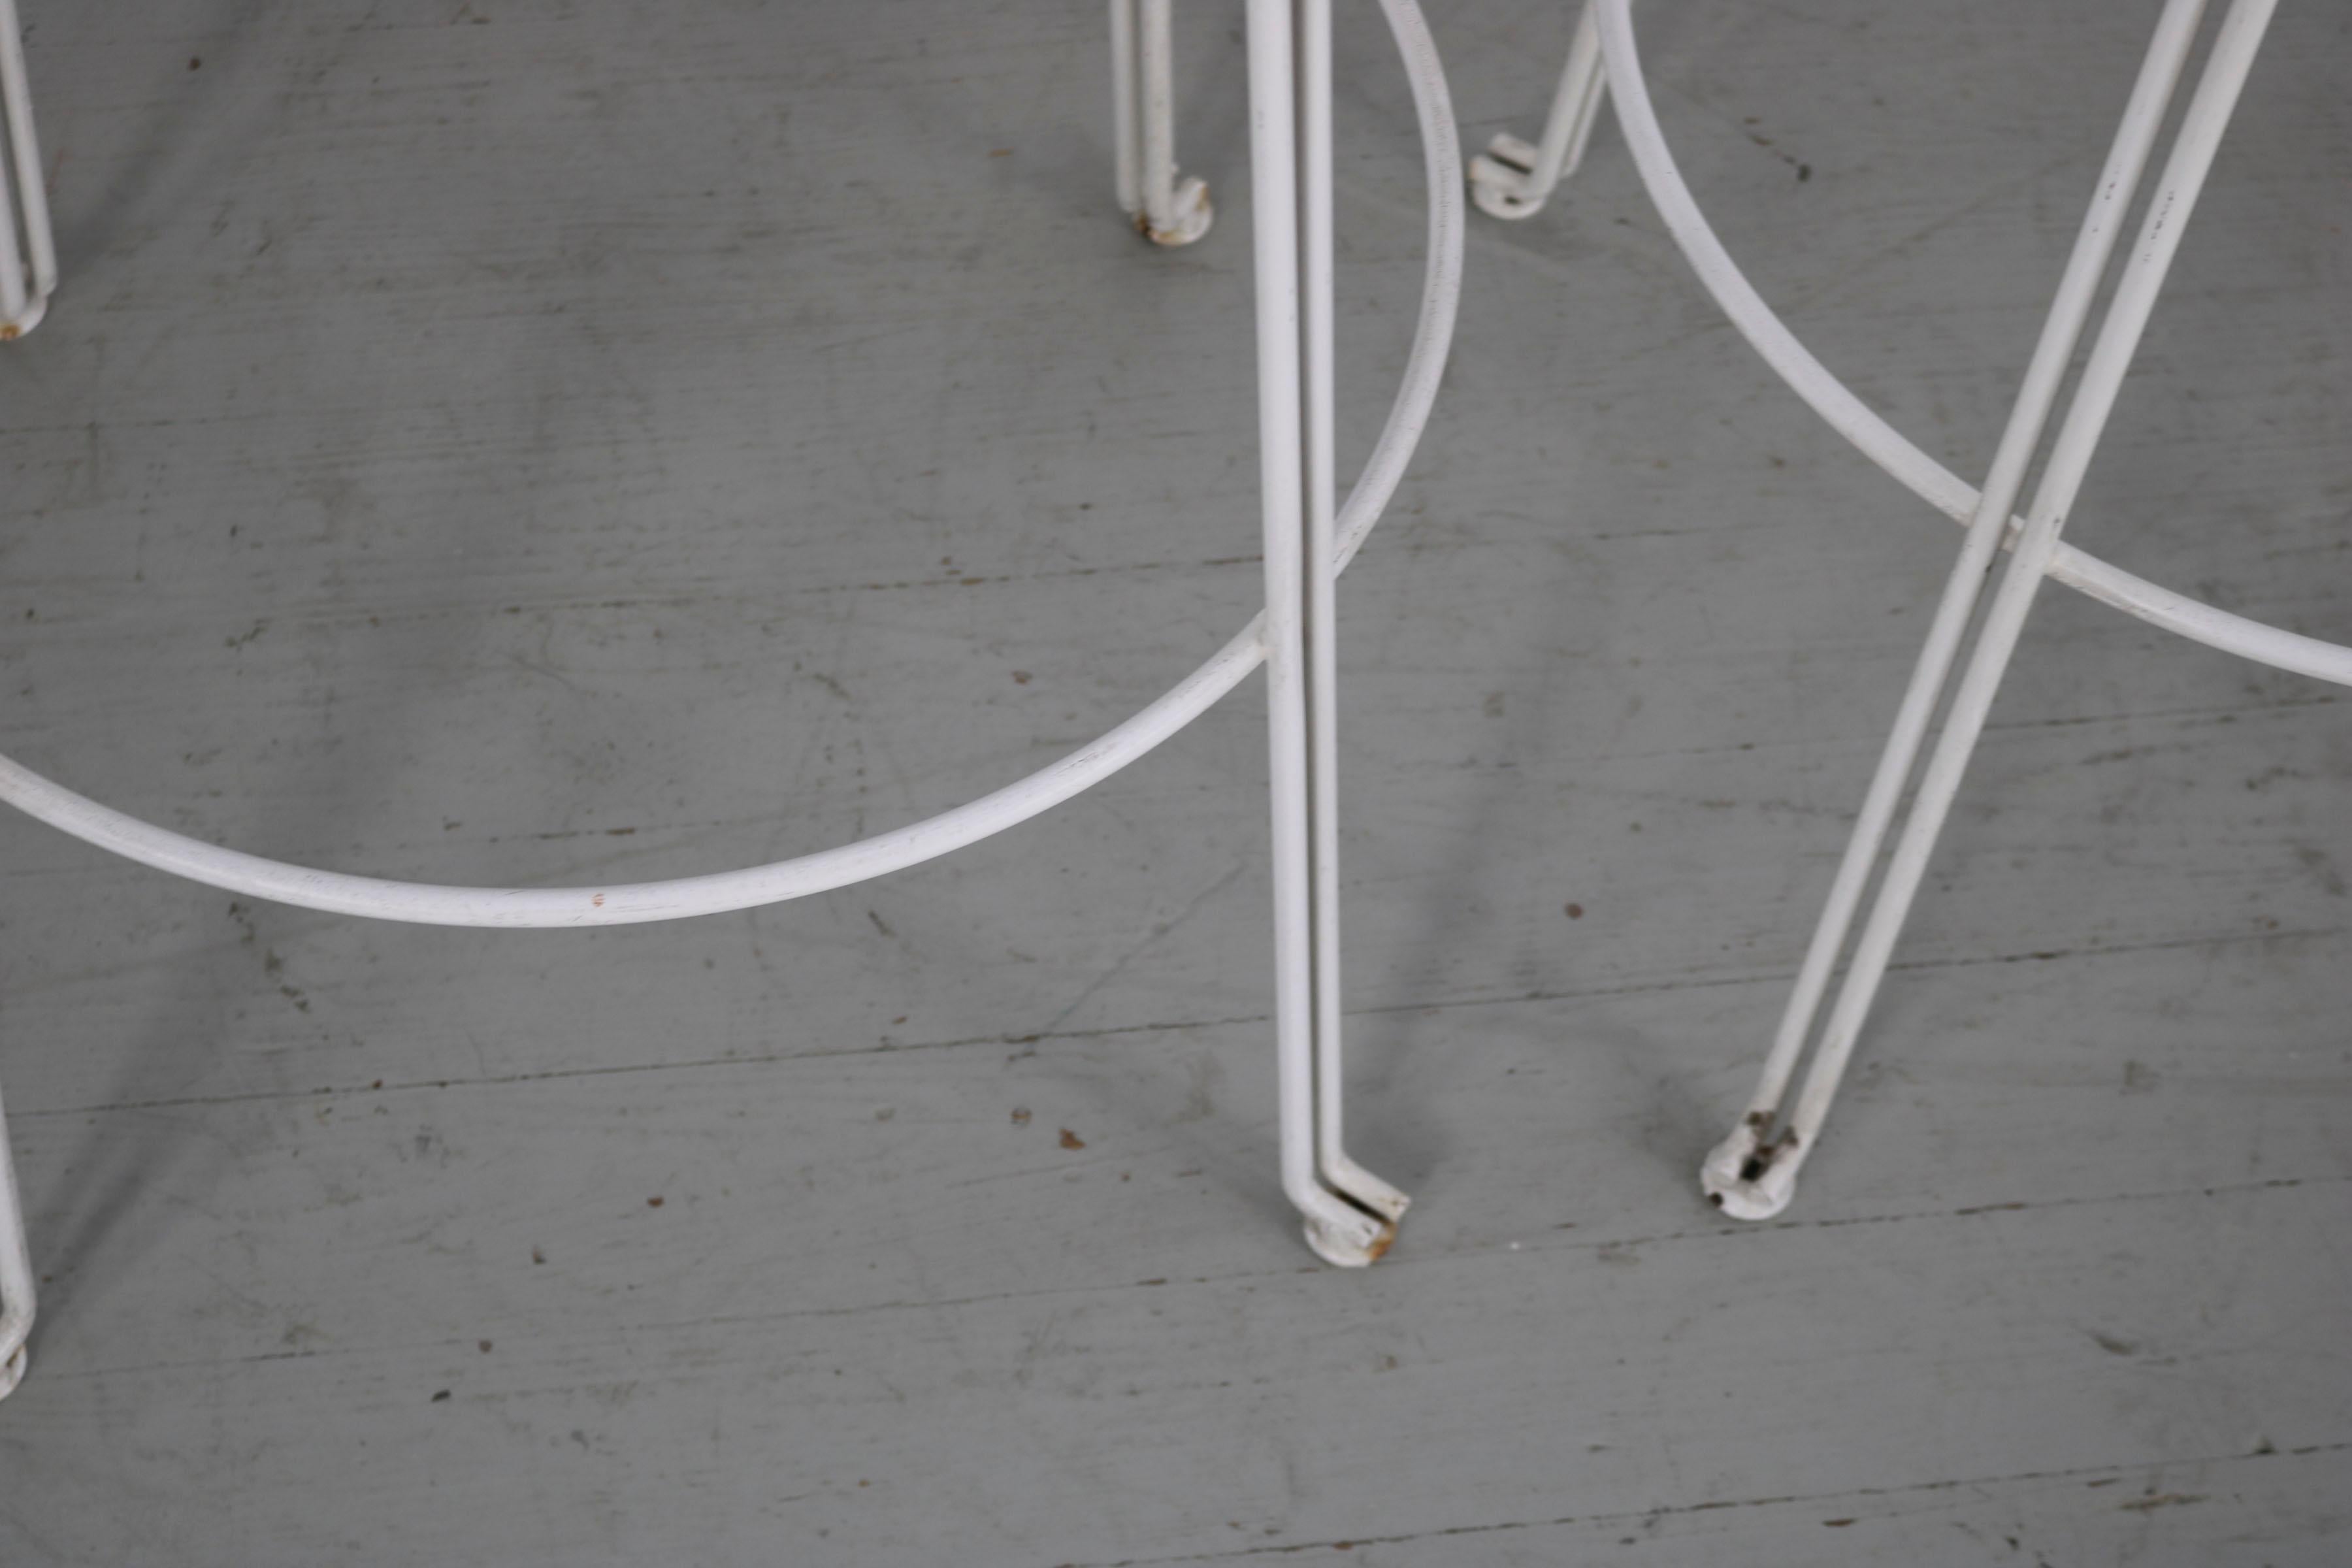 Set of Two Giuseppe de Vivo Bar Stools in White Lacquered Iron, Italy 1950s For Sale 4